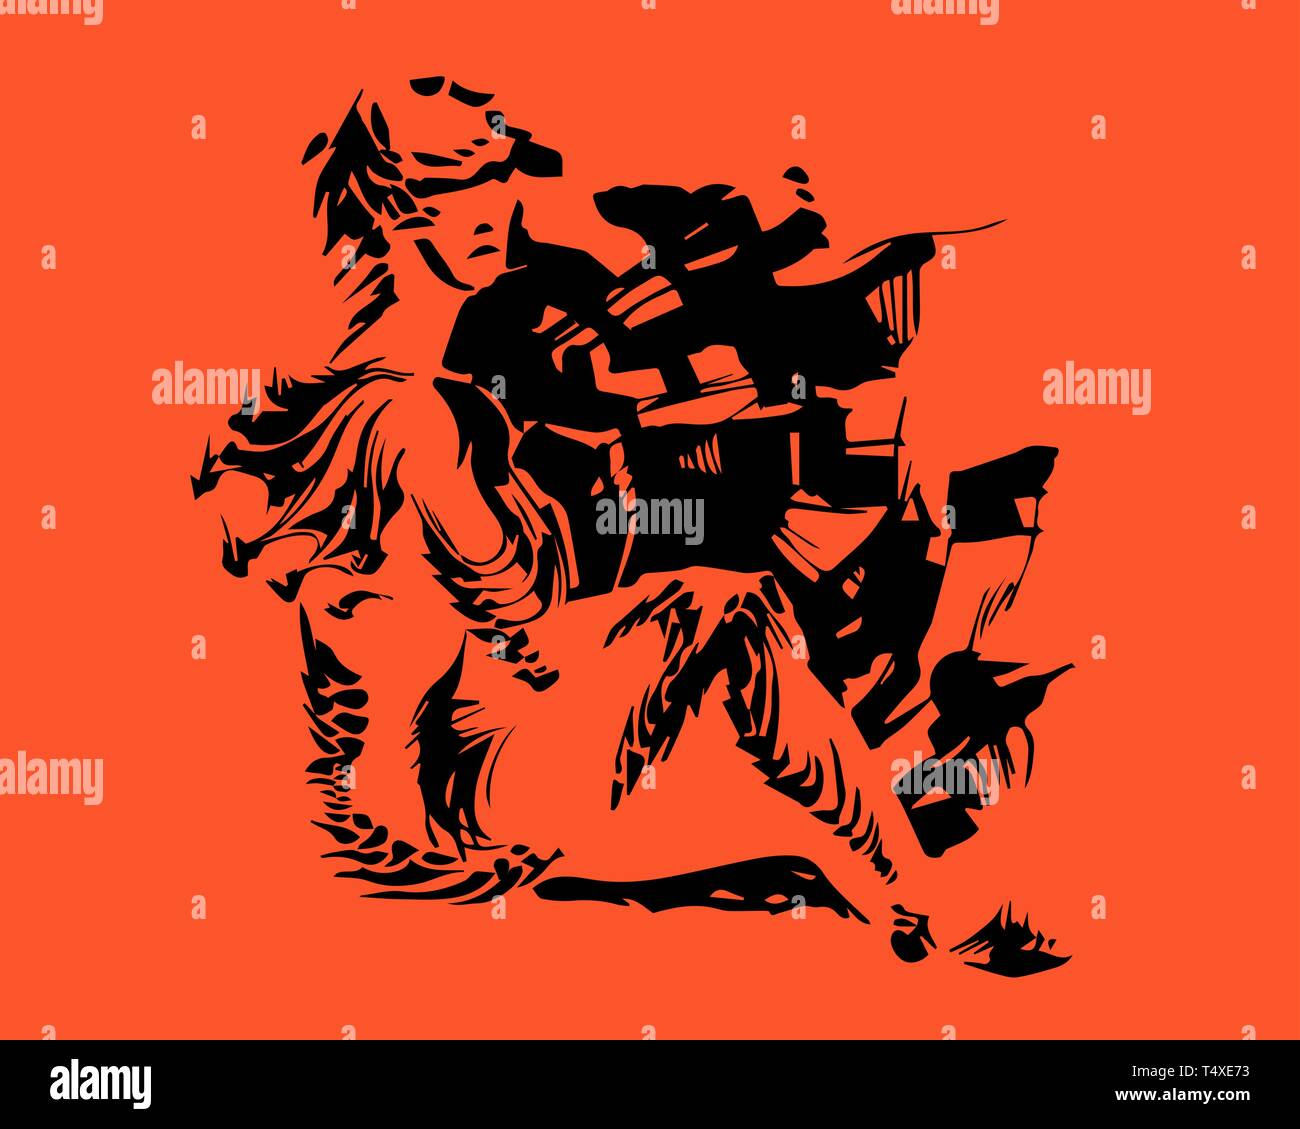 Vector image of a fantastic amphibian woman. The chimera girl is drawn in black ink on a saturated red-orange background.The mutant is depicted in a s Stock Vector